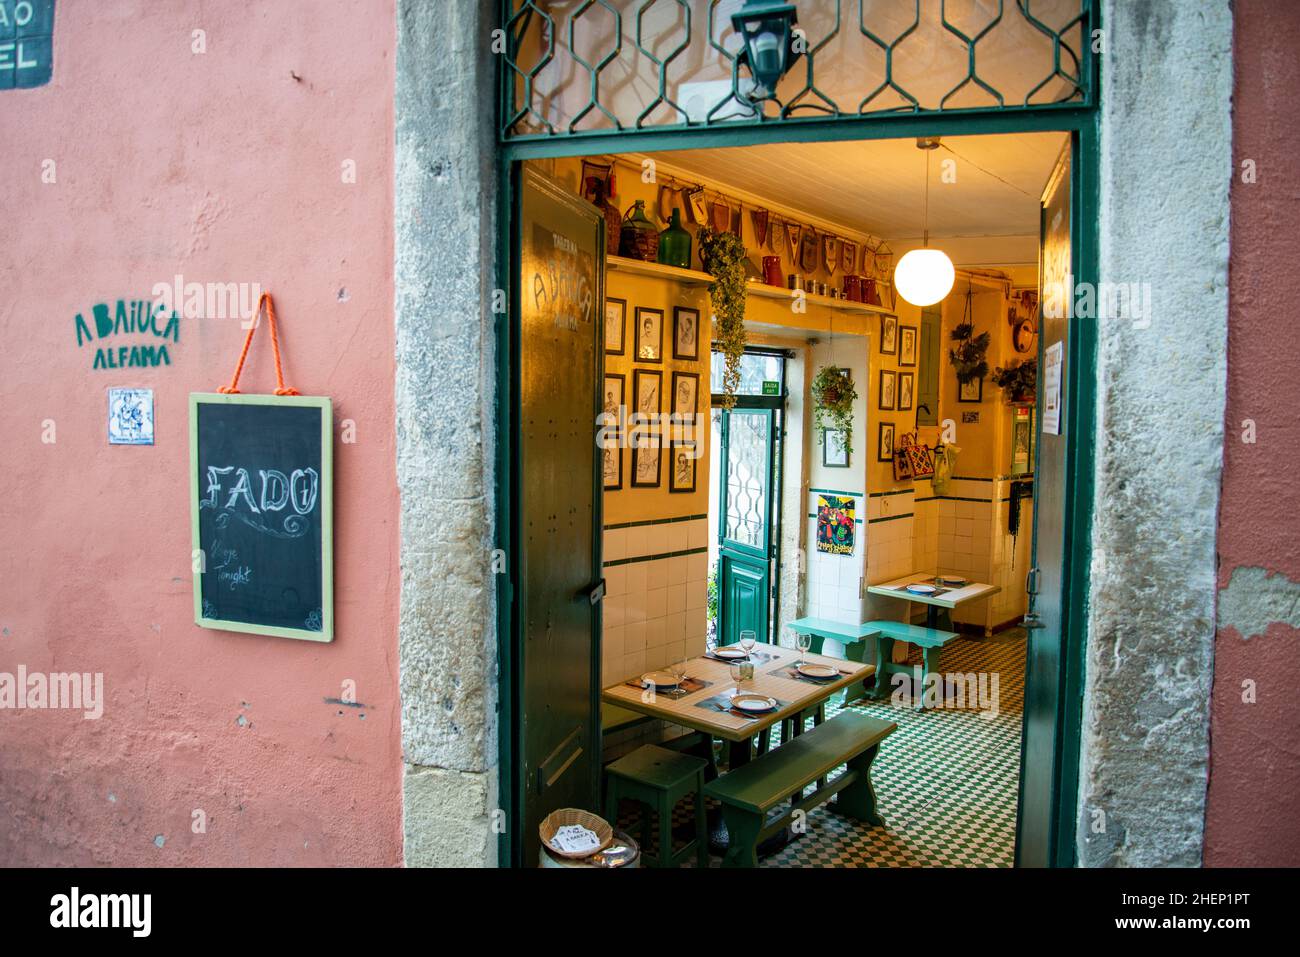 a traditional Fado Music Restaurant in a street and alley in Alfama in the City of Lisbon in Portugal.  Portugal, Lisbon, October, 2021 Stock Photo